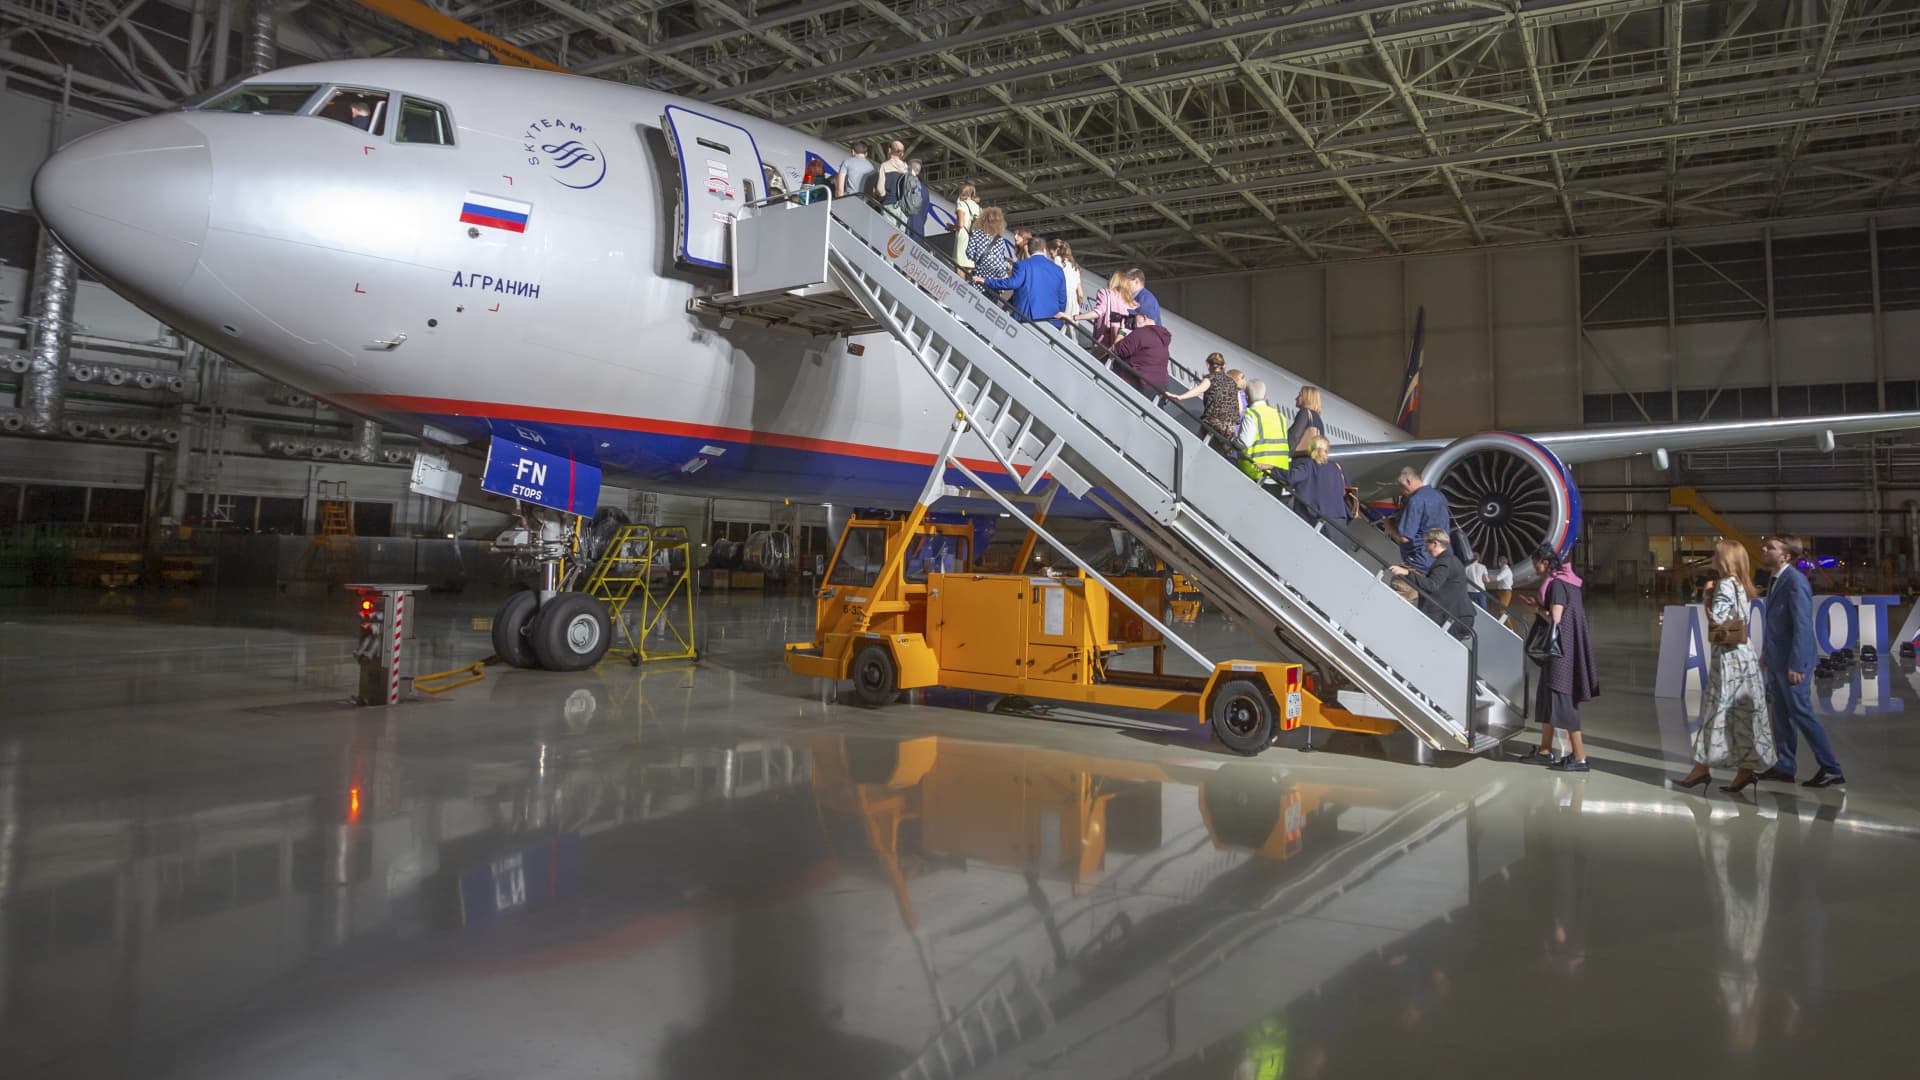 A presentation event takes place at Sheremetyevo International Airport for Aeroflot's Boeing 777-300ER airliner featuring a revamped cabin and individual business class seating. Marina Lystseva/TASS